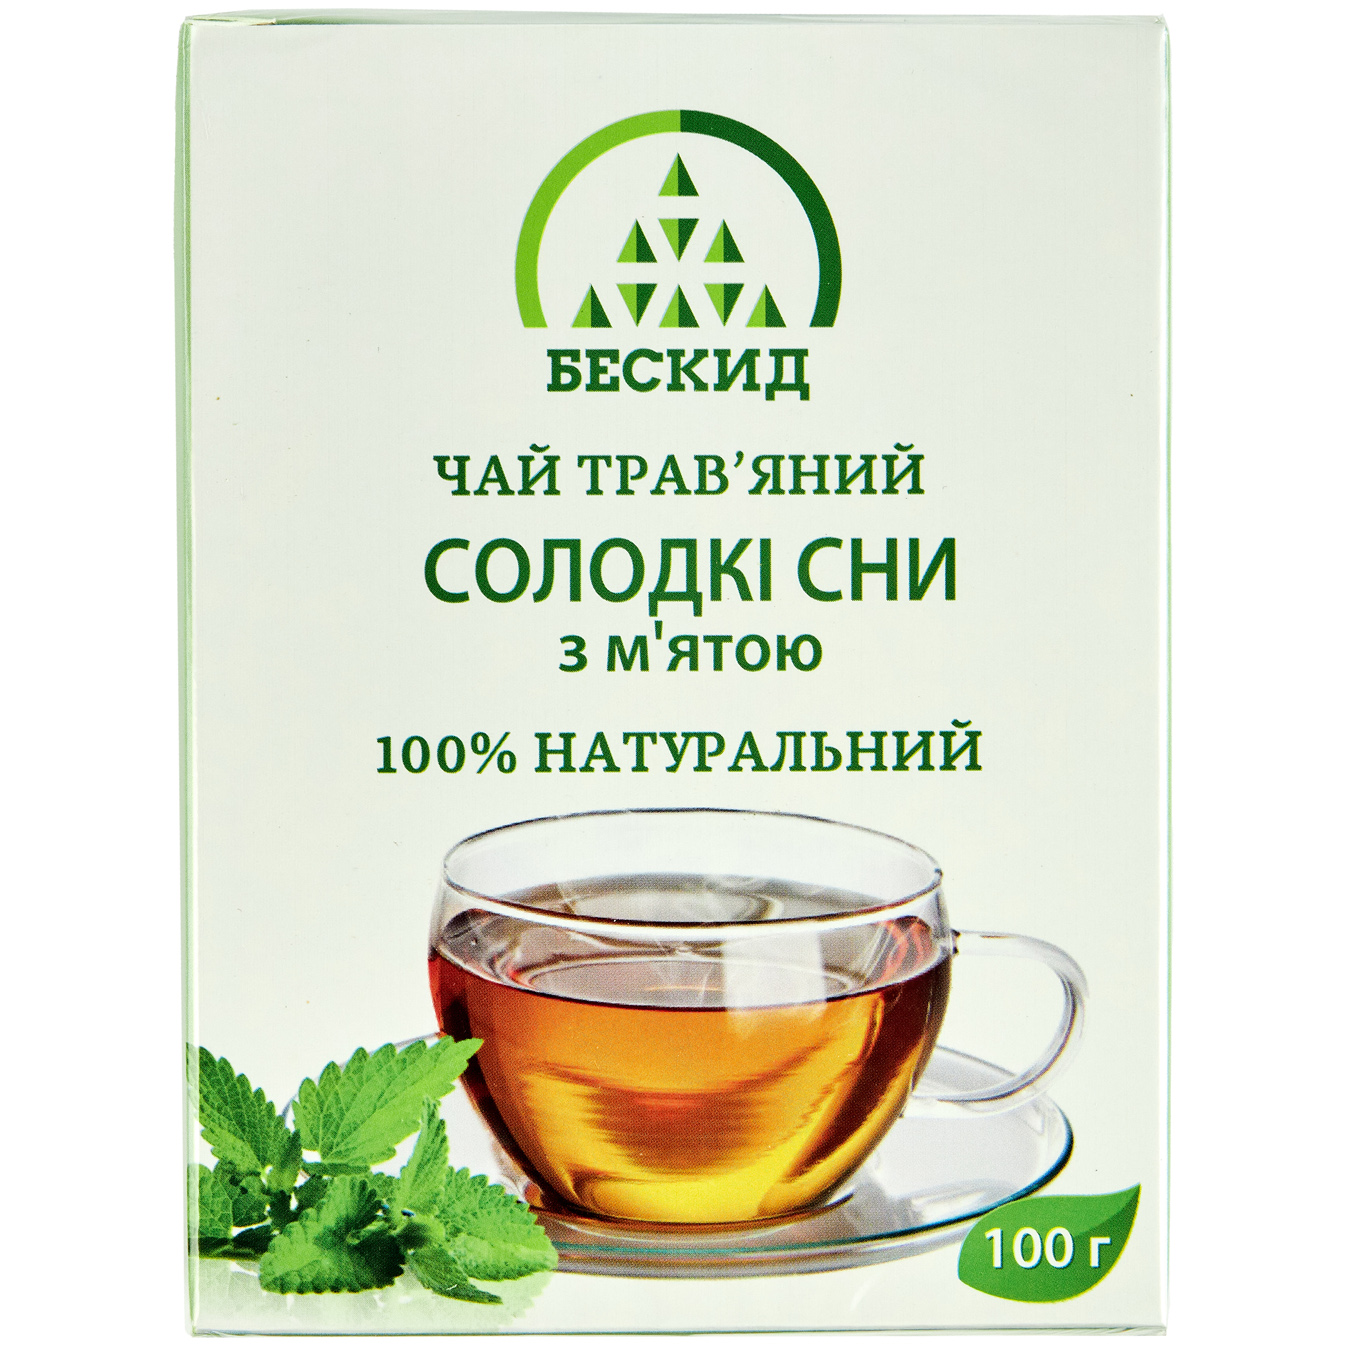 Beskyd herbal tea Sweet dreams with mint and hawthorn fruits 100g